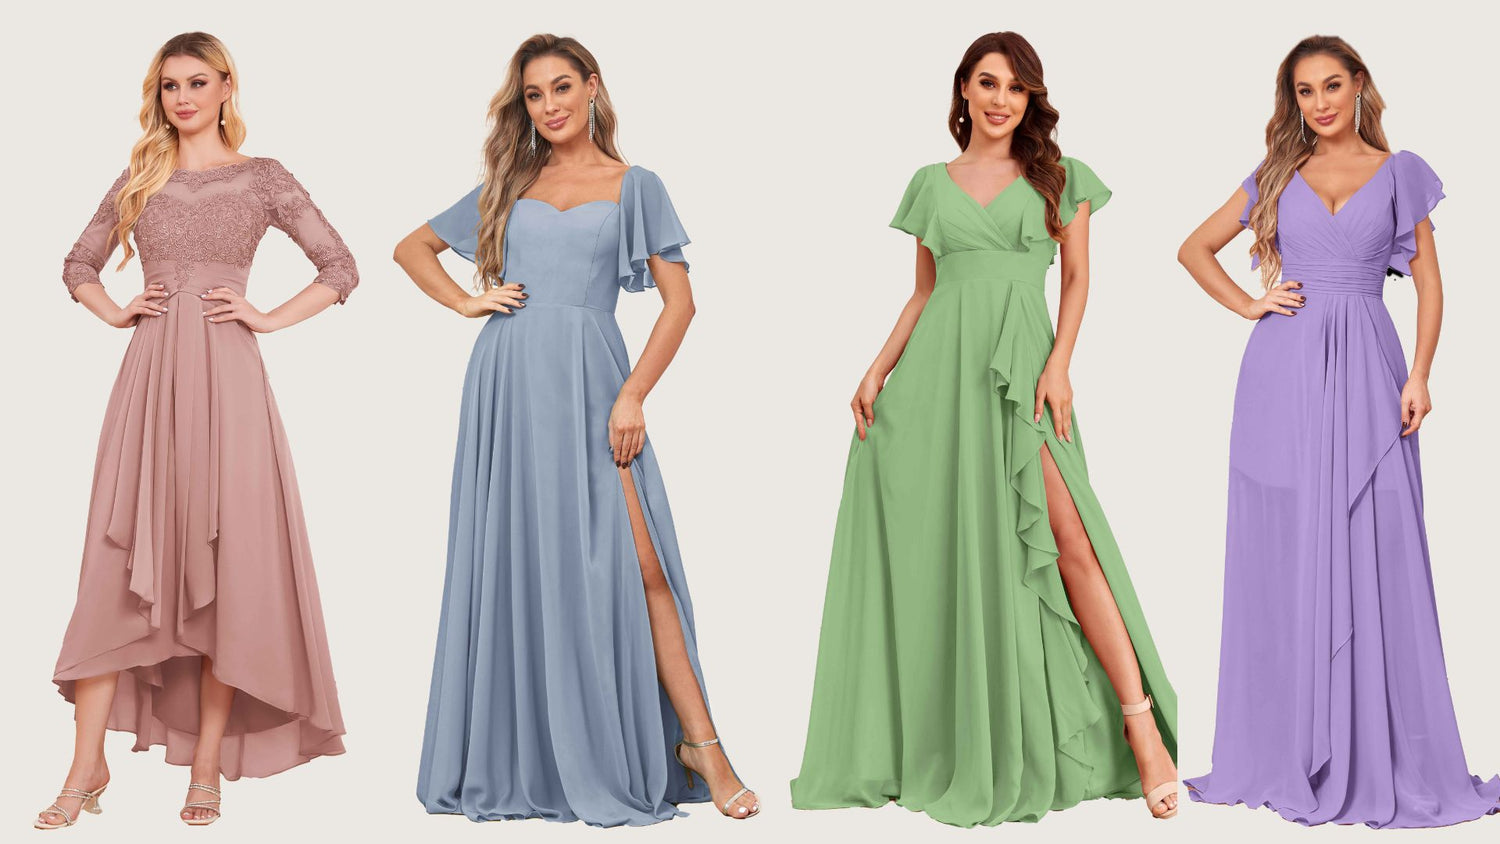 Breaking News: Design Your Own Bridesmaid Dress With Pomuyoo